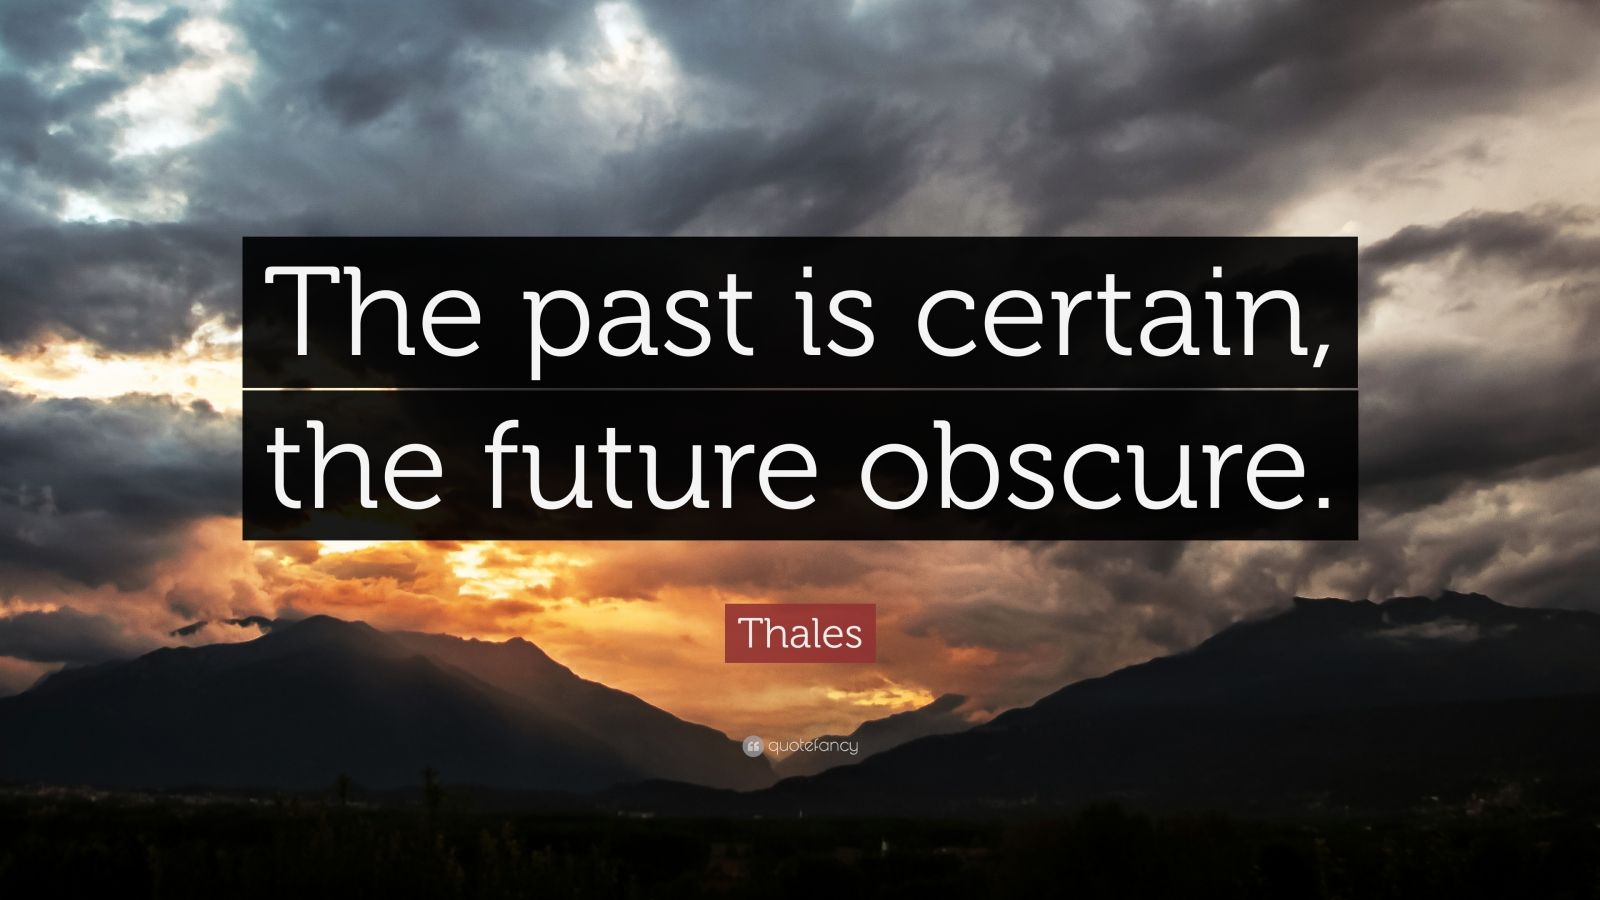 Thales Quote: “The past is certain, the future obscure.” (7 wallpapers ...